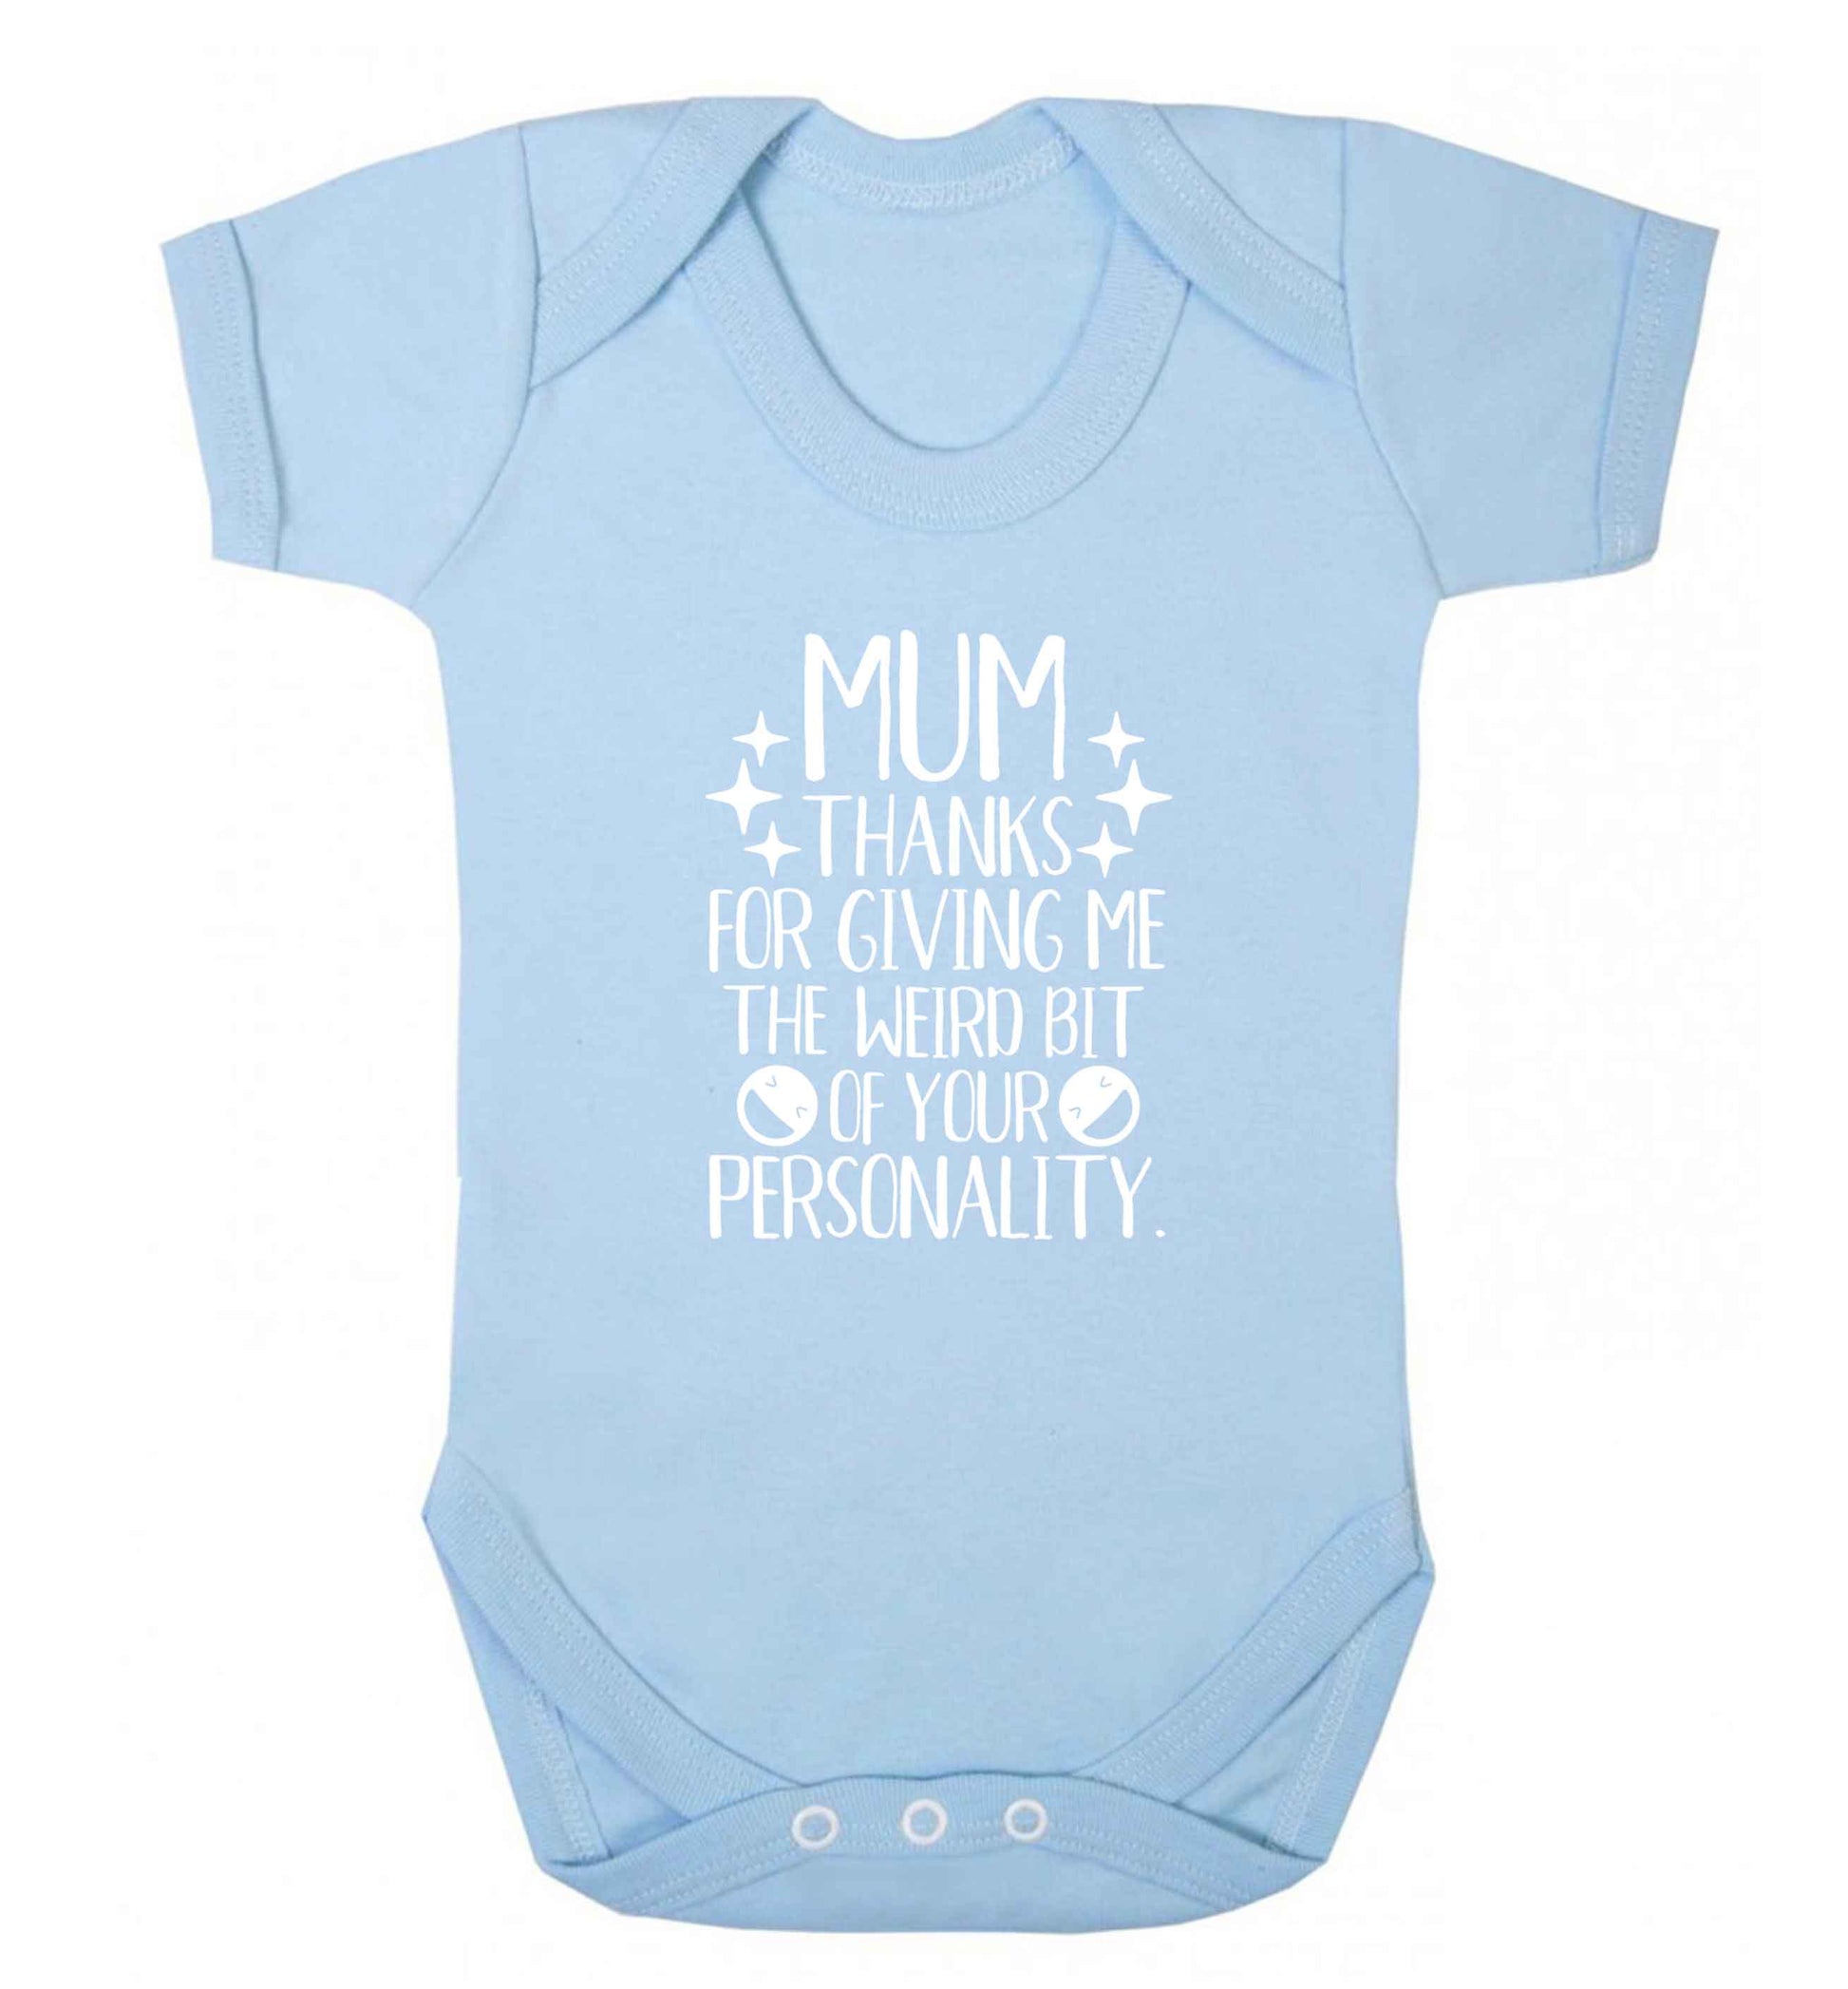 Mum thanks for giving me the weird bit of your personality baby vest pale blue 18-24 months